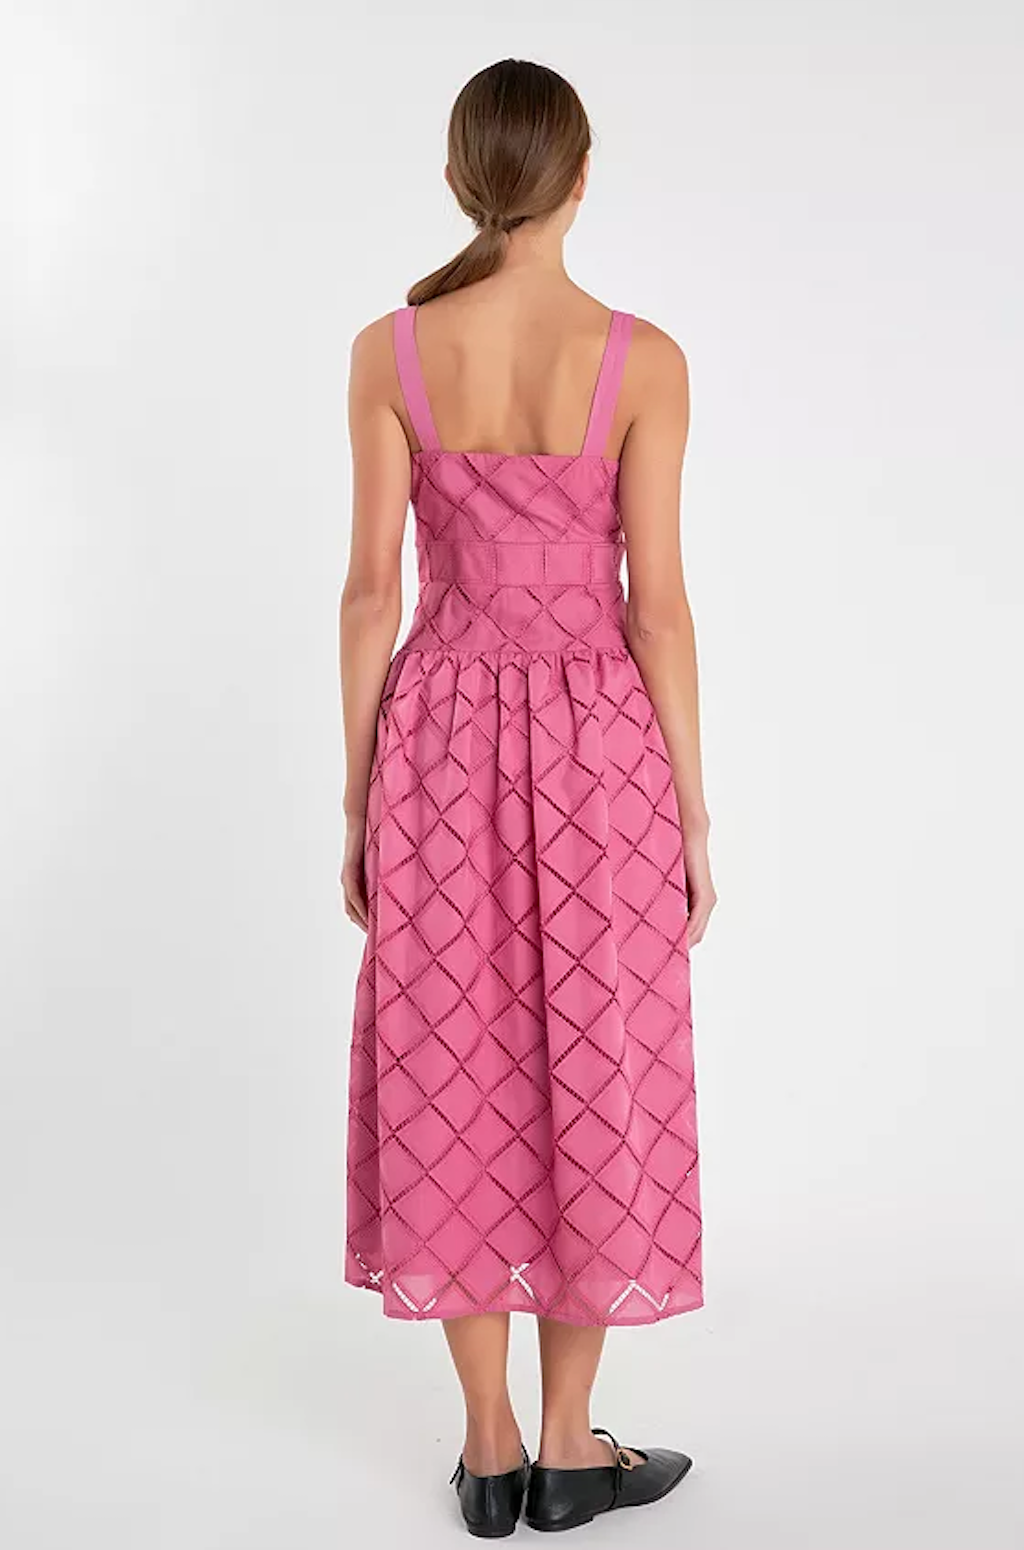 ELAINE EMBROIDERED LACE MIDI DRESS IN BERRY PINK